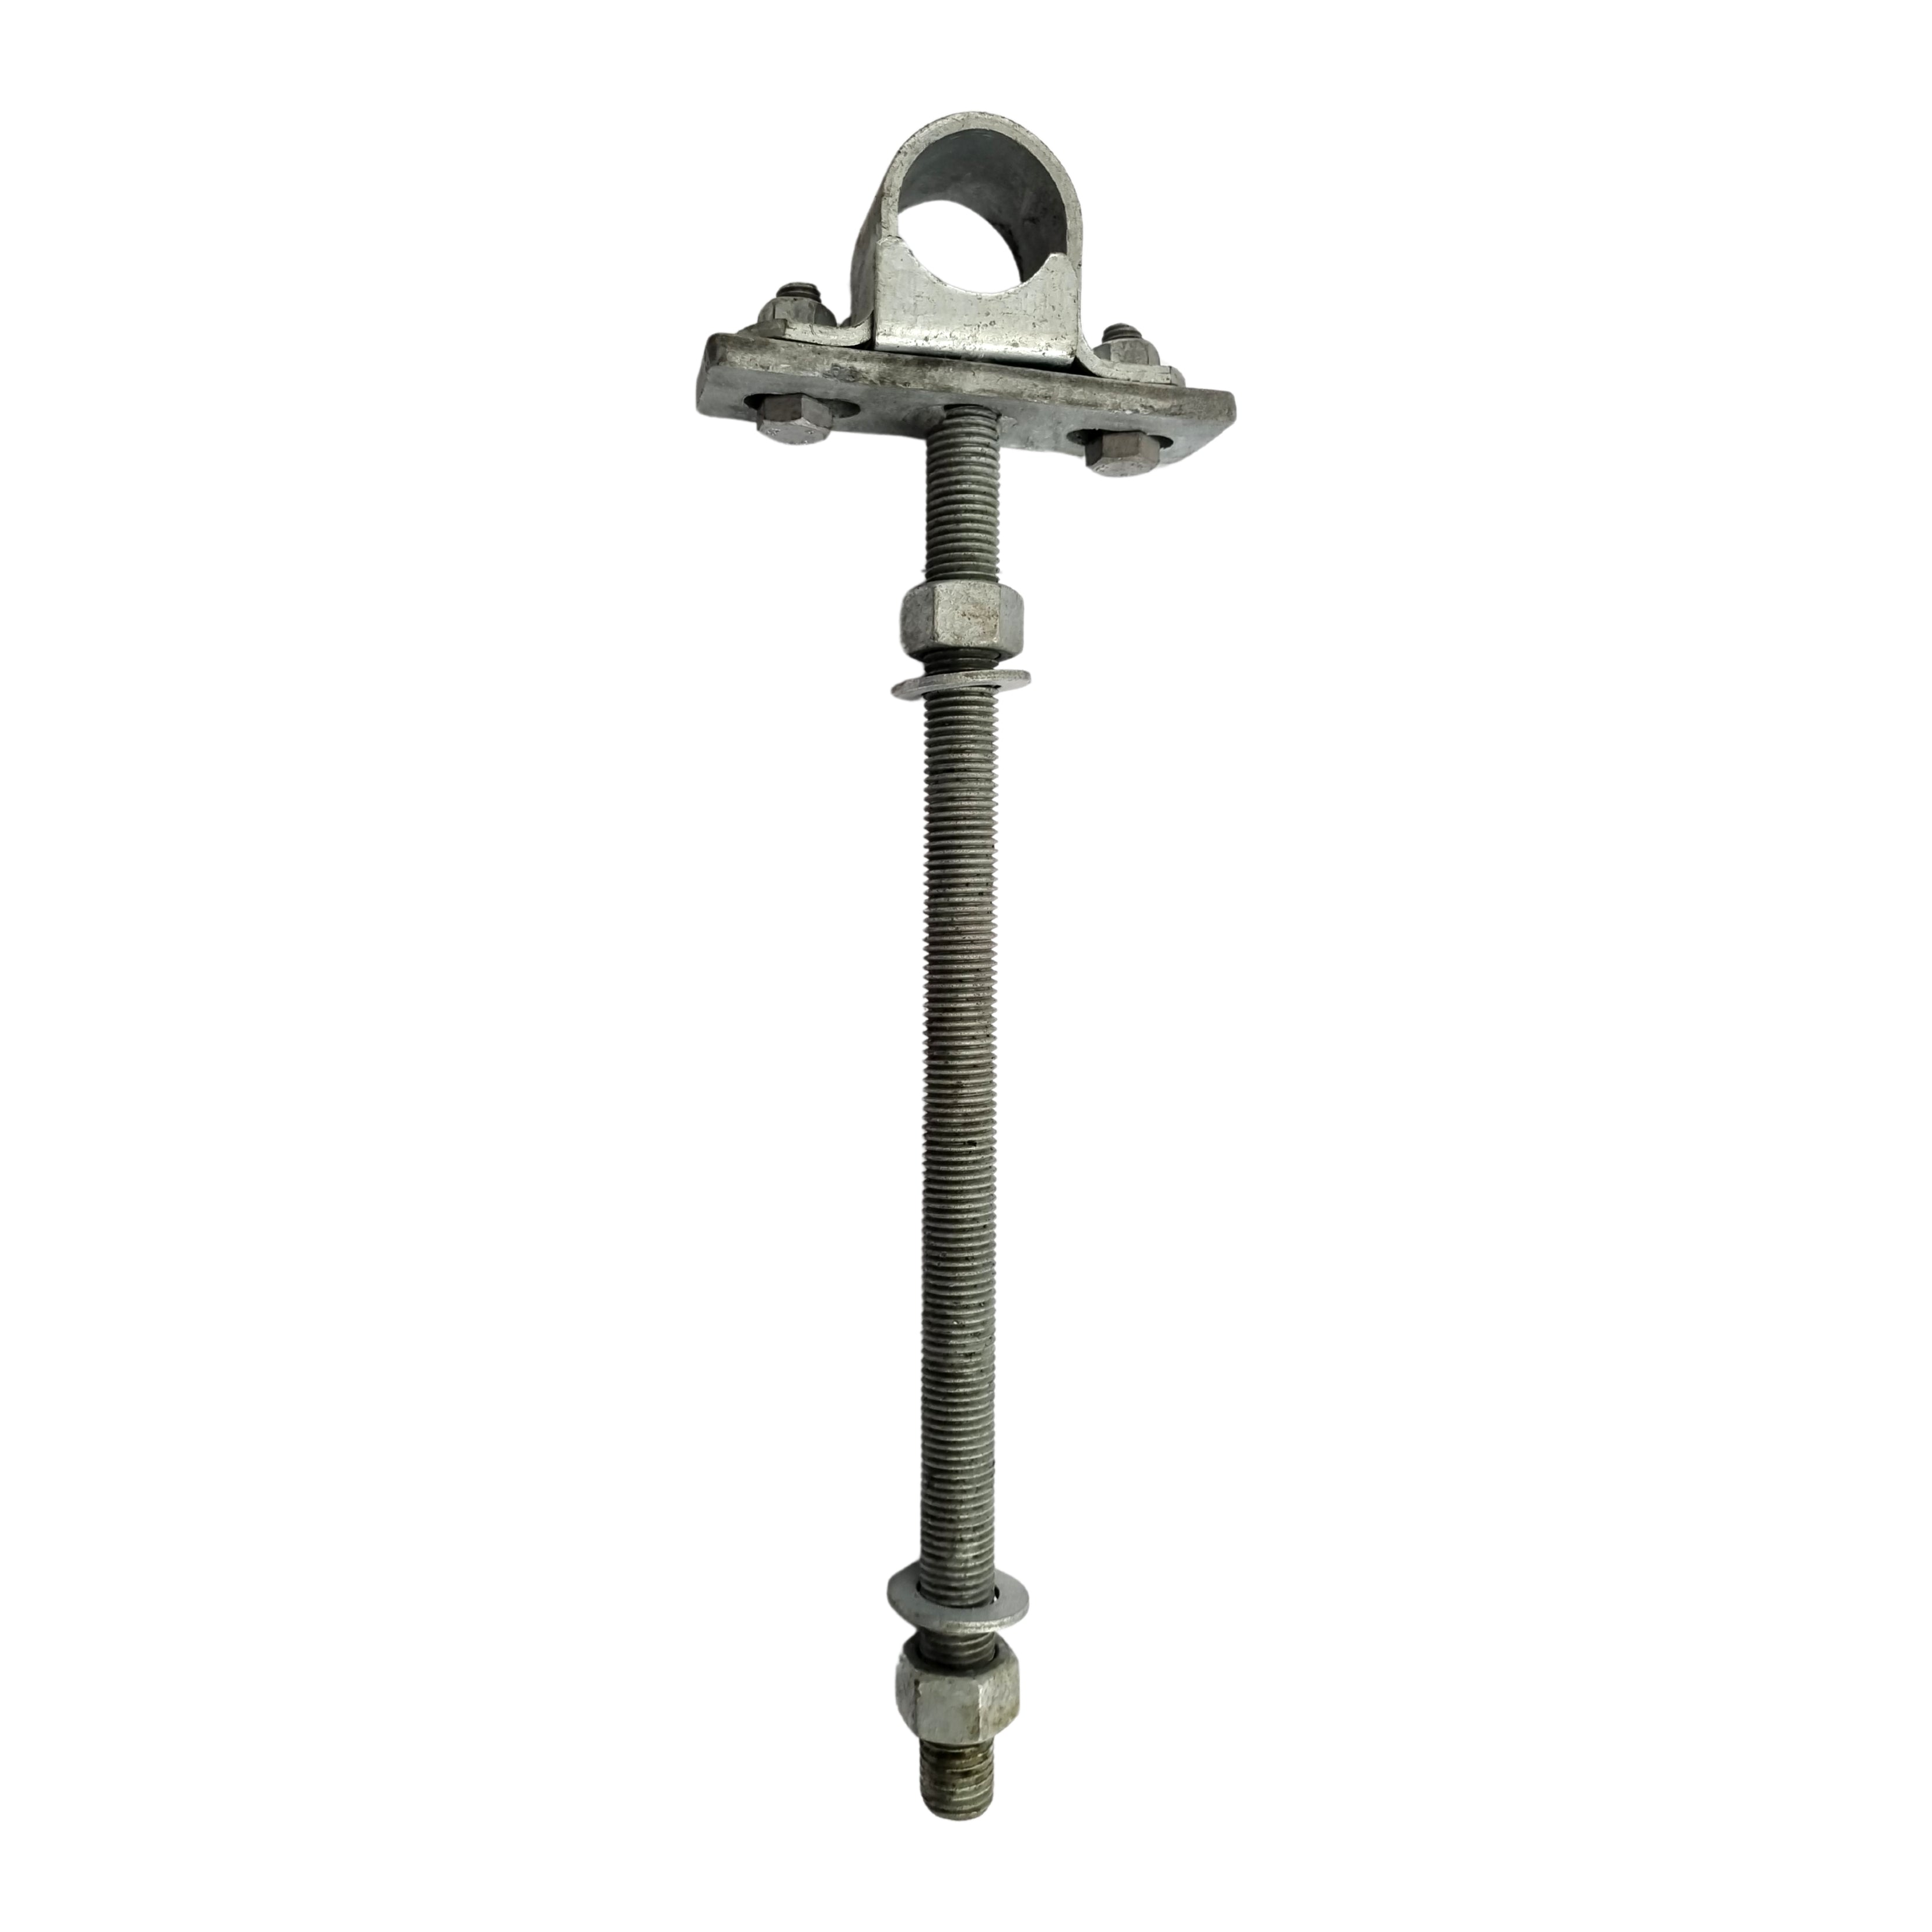 Timber Post Strap - Bolt Thru - Type B - Galvanised. Codes: KQS2S & KQS1S . Size: 32NB. Australian Made. Fence & Gate Fittings. Shop online chain.com.au. Australia wide shipping.